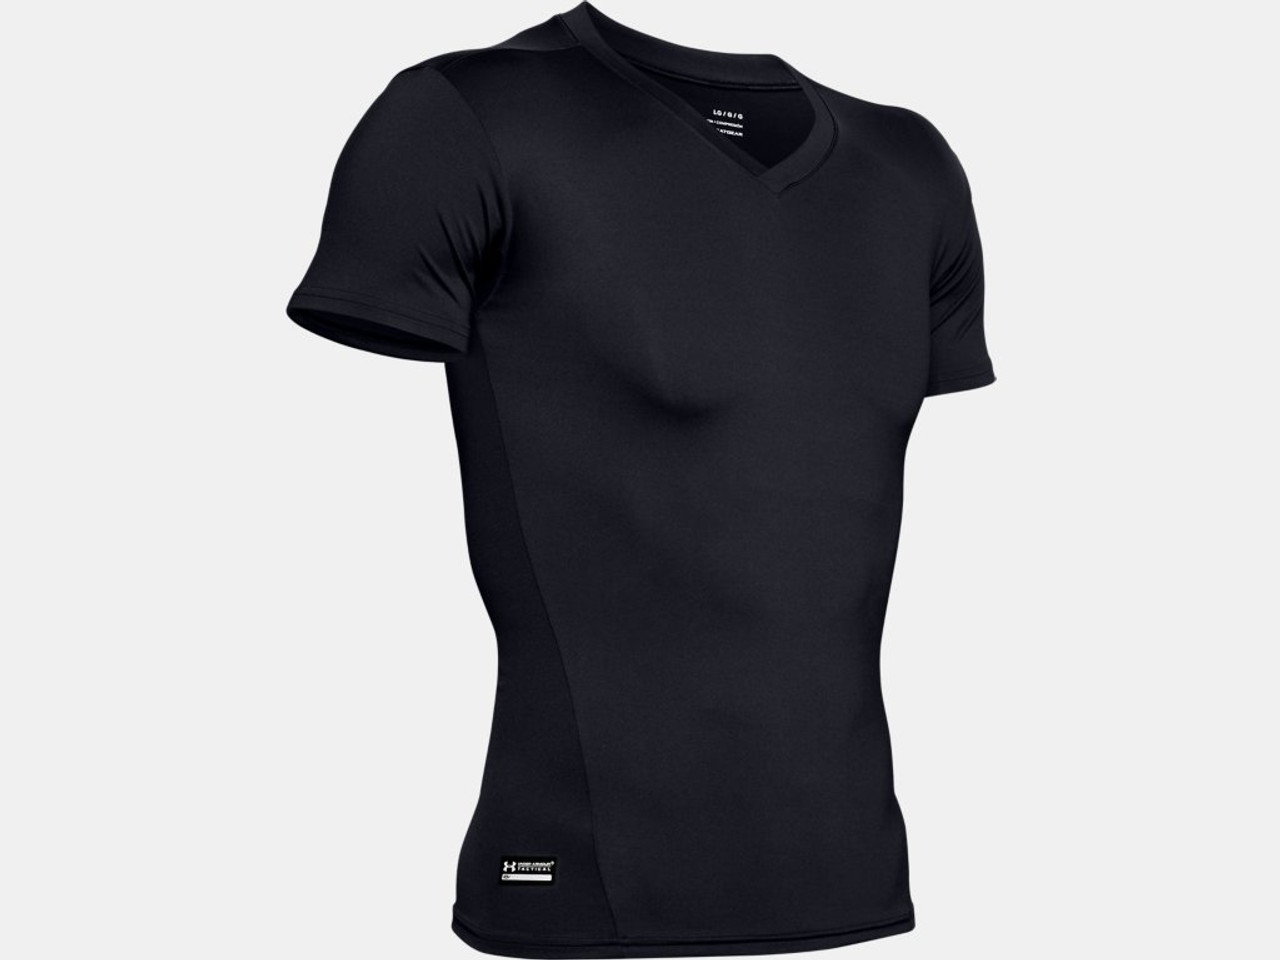 Stay Cool and Comfortable with Men's HeatGear Compression Shortsleeve T- Shirt